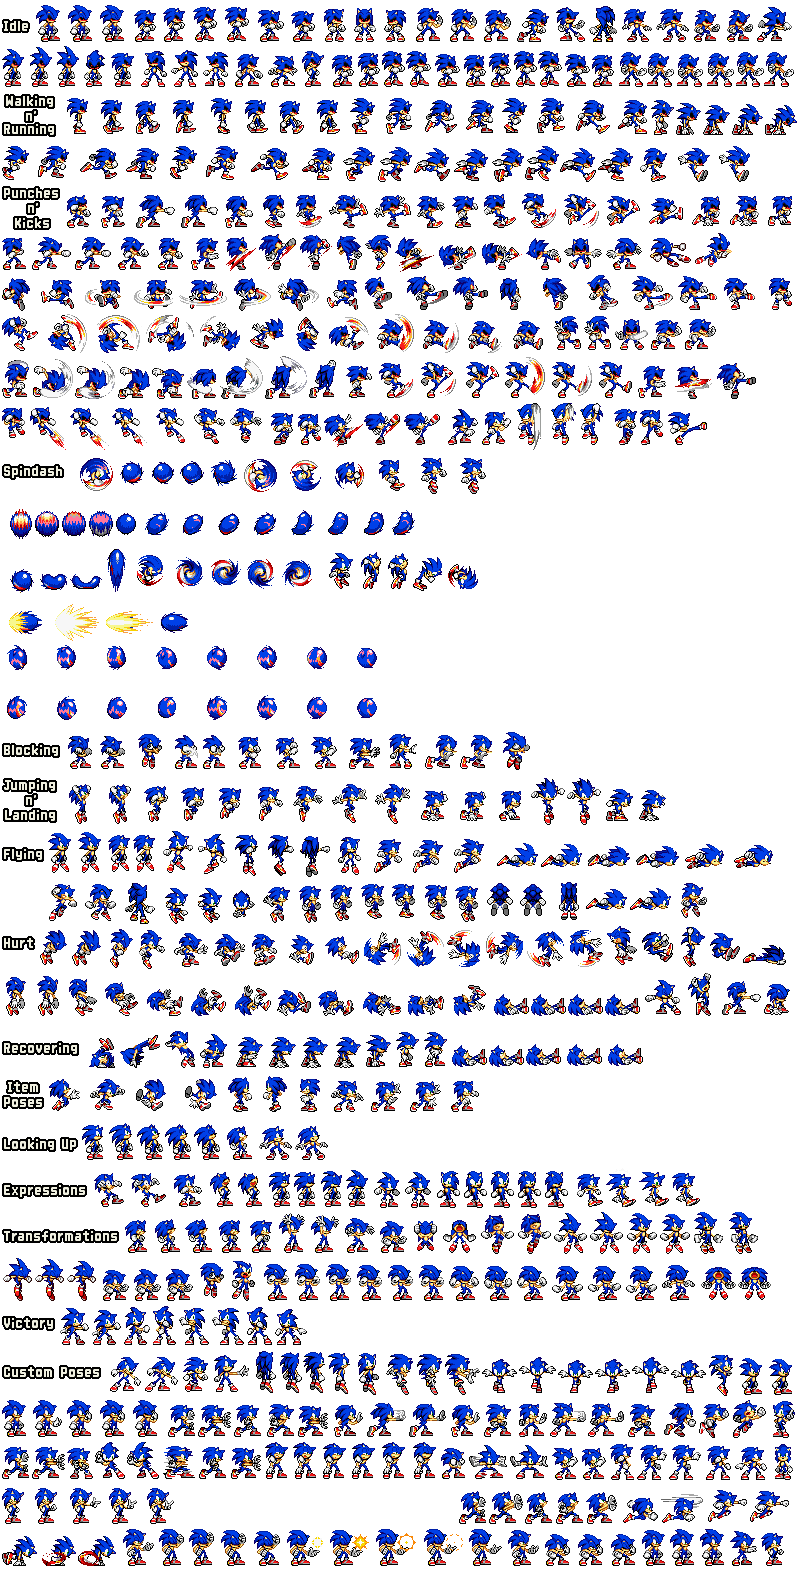 Sonic.EXE Base Form Sprites by YTSuperplays on DeviantArt